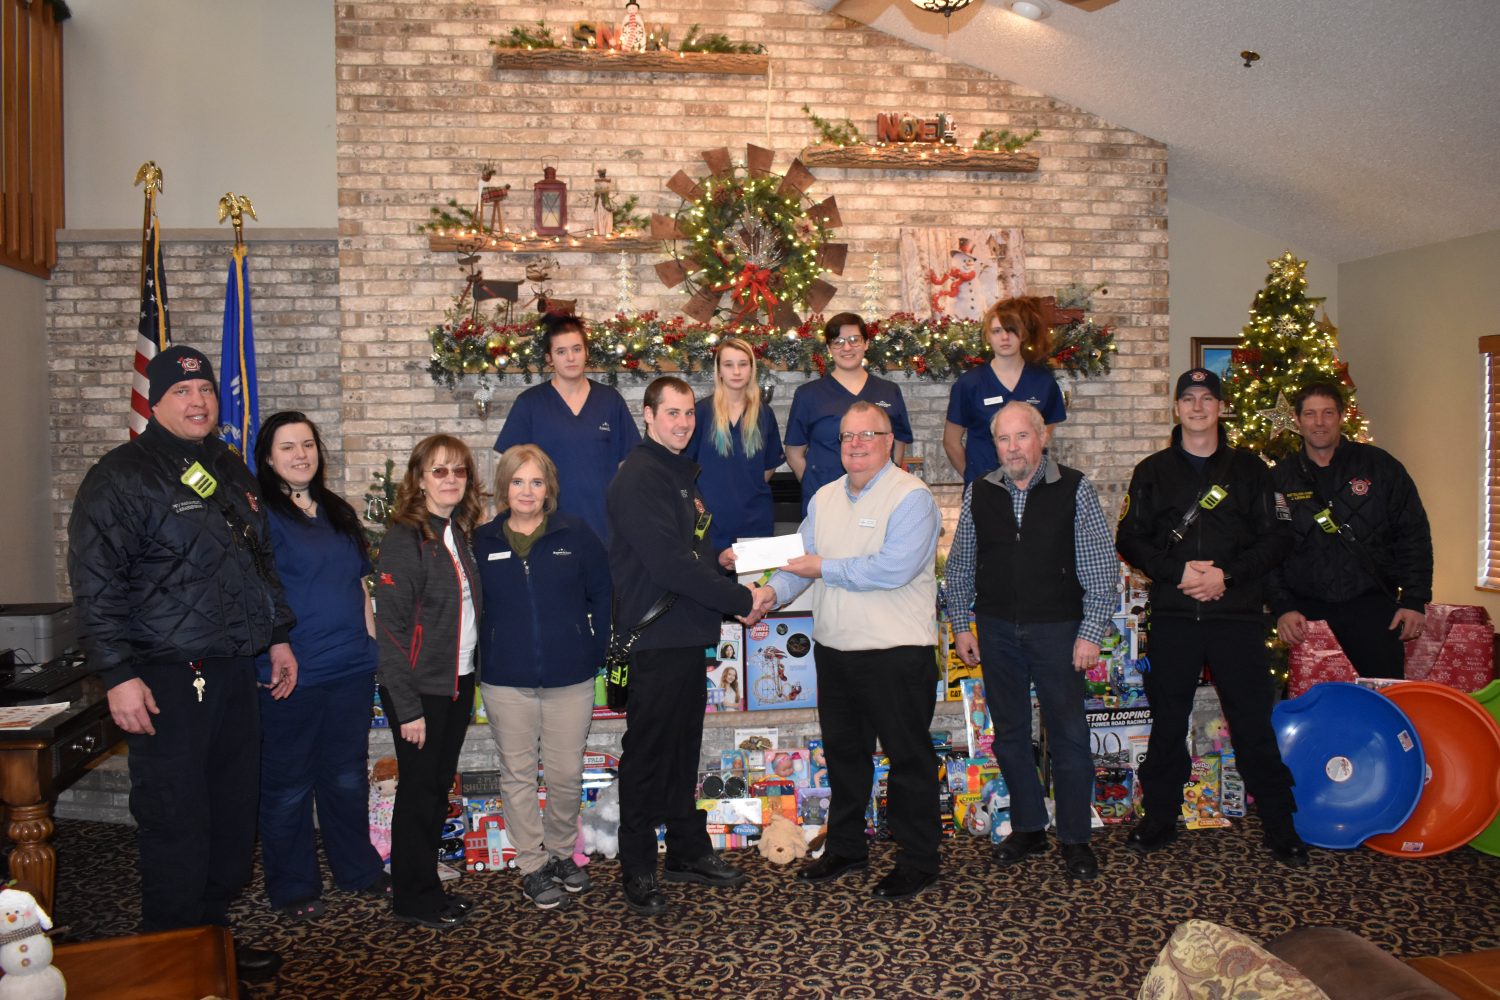 AmericInn continues to support MFD’s Tree of Hope